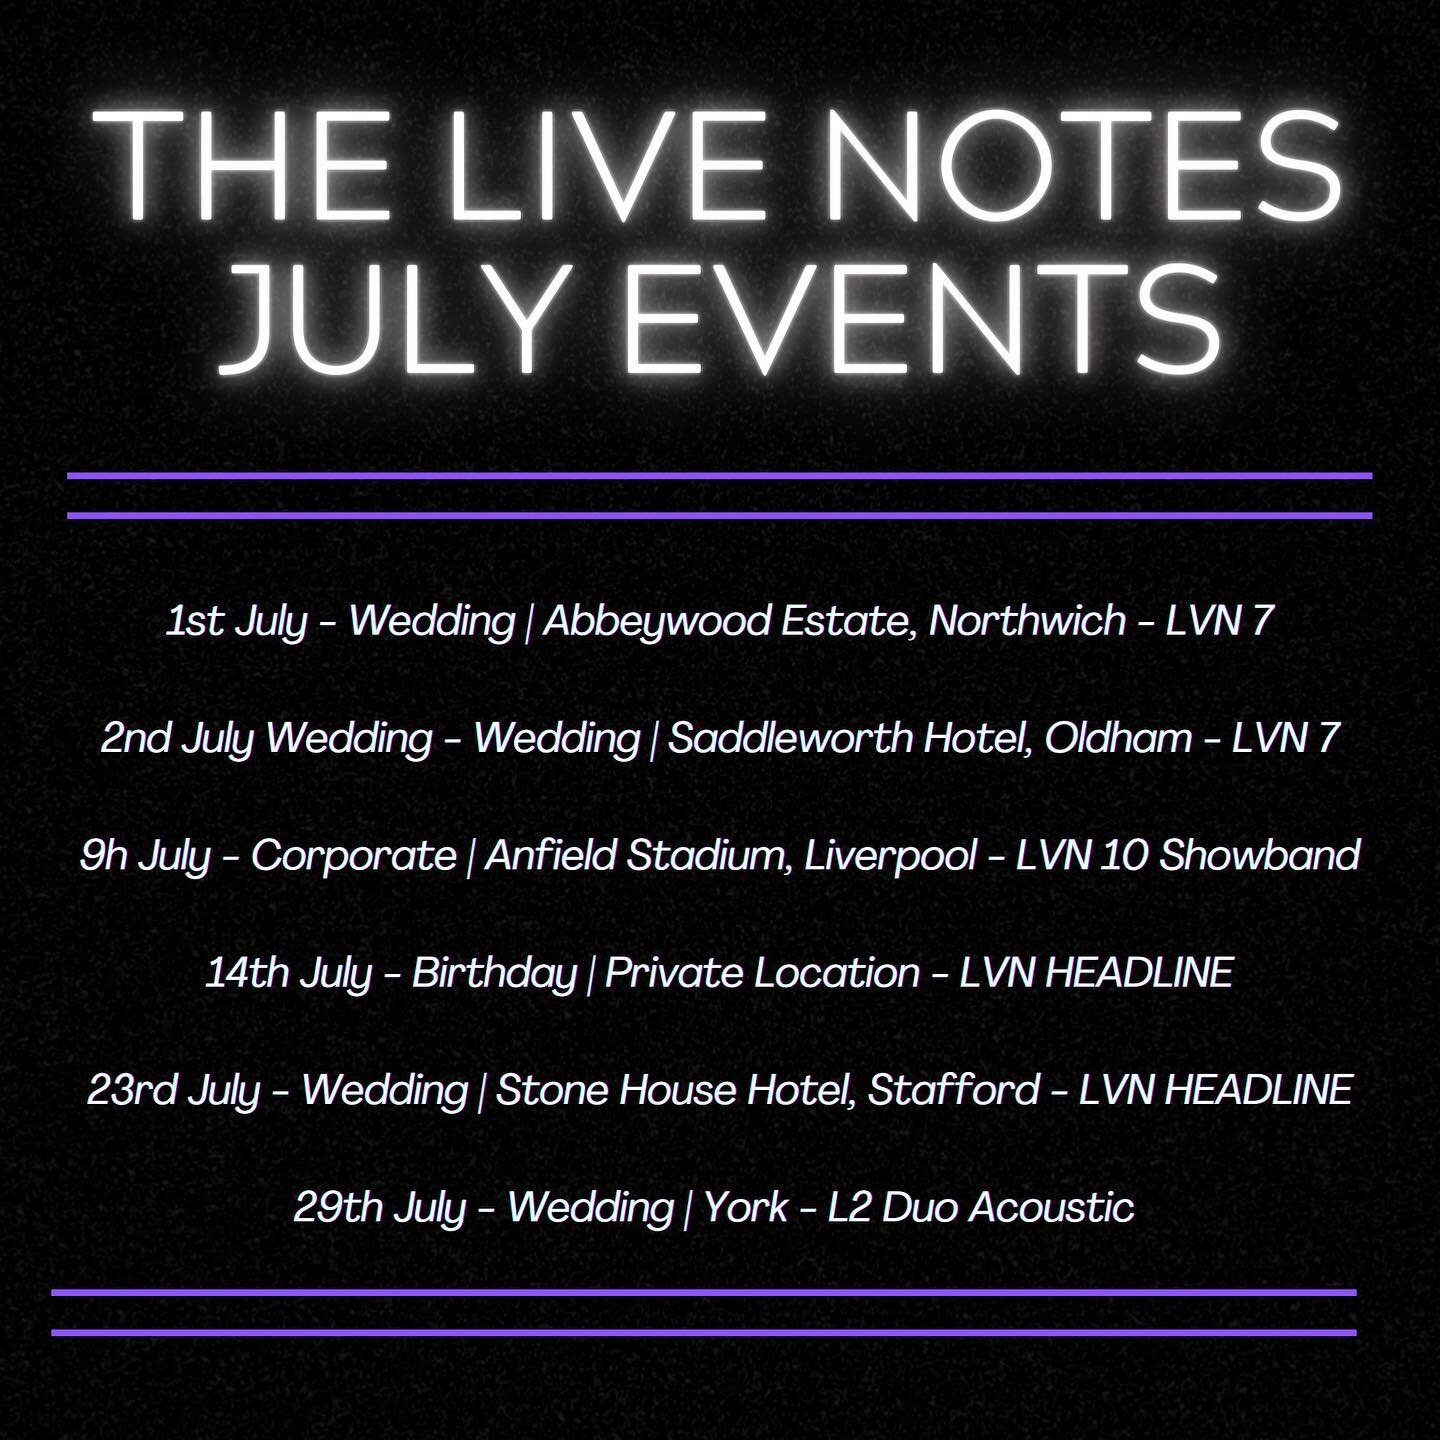 Amazing to post this at the start of our busiest month since we started The Live Notes. 6 events this month 🎉🎉🎉 

Enquires are even coming in as far ahead as 2024 now. Such a pleasure to perform our sets at so many events since things reopened las